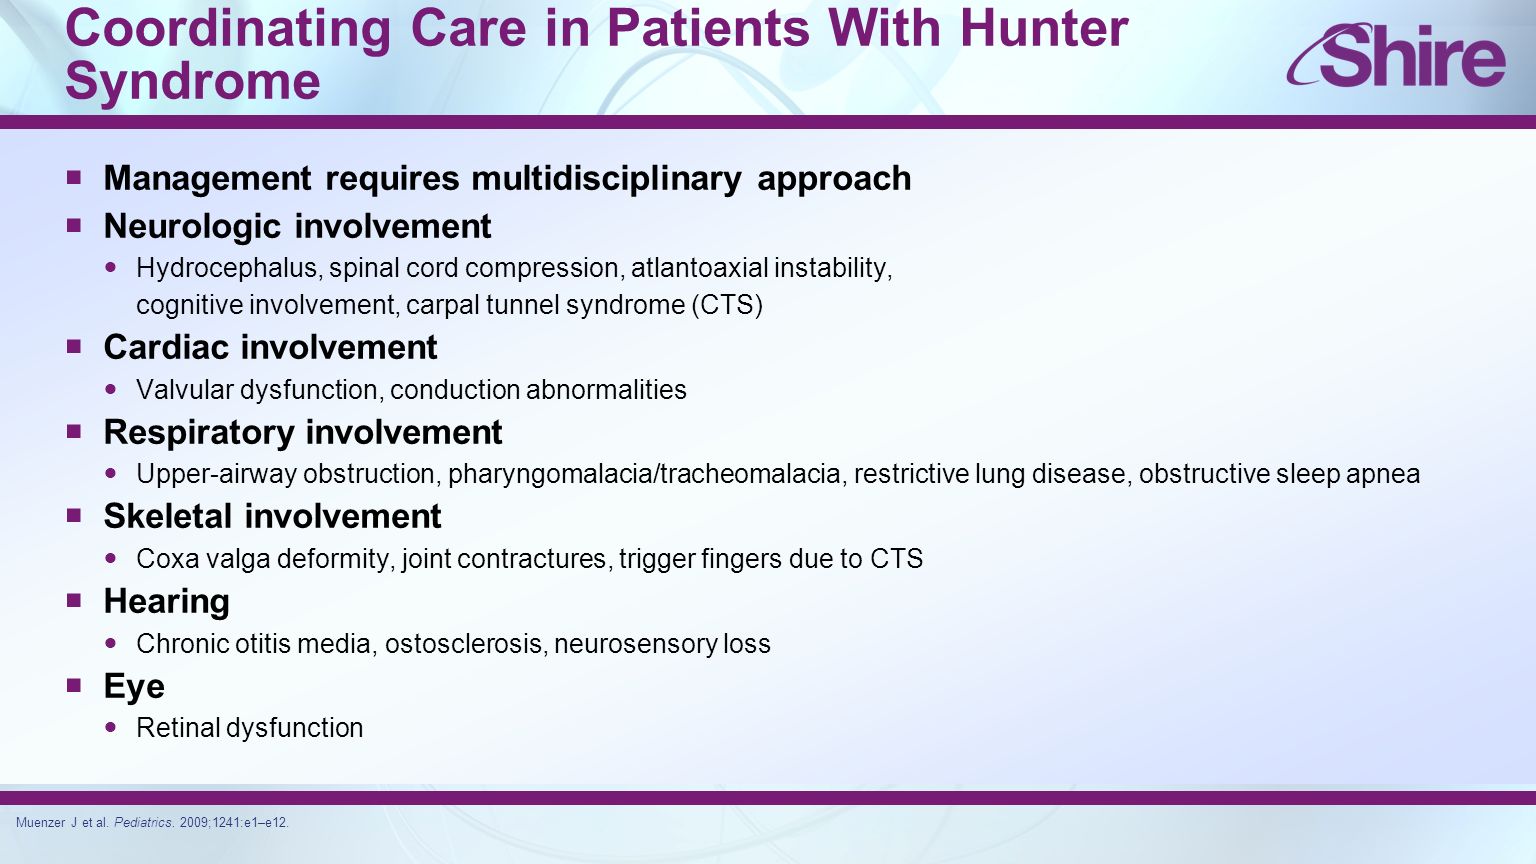 Coordinating Care in Patients With Hunter Syndrome  Management requires multidisciplinary approach  Neurologic involvement Hydrocephalus, spinal cord compression, atlantoaxial instability, cognitive involvement, carpal tunnel syndrome (CTS)  Cardiac involvement Valvular dysfunction, conduction abnormalities  Respiratory involvement Upper-airway obstruction, pharyngomalacia/tracheomalacia, restrictive lung disease, obstructive sleep apnea  Skeletal involvement Coxa valga deformity, joint contractures, trigger fingers due to CTS  Hearing Chronic otitis media, ostosclerosis, neurosensory loss  Eye Retinal dysfunction Muenzer J et al.